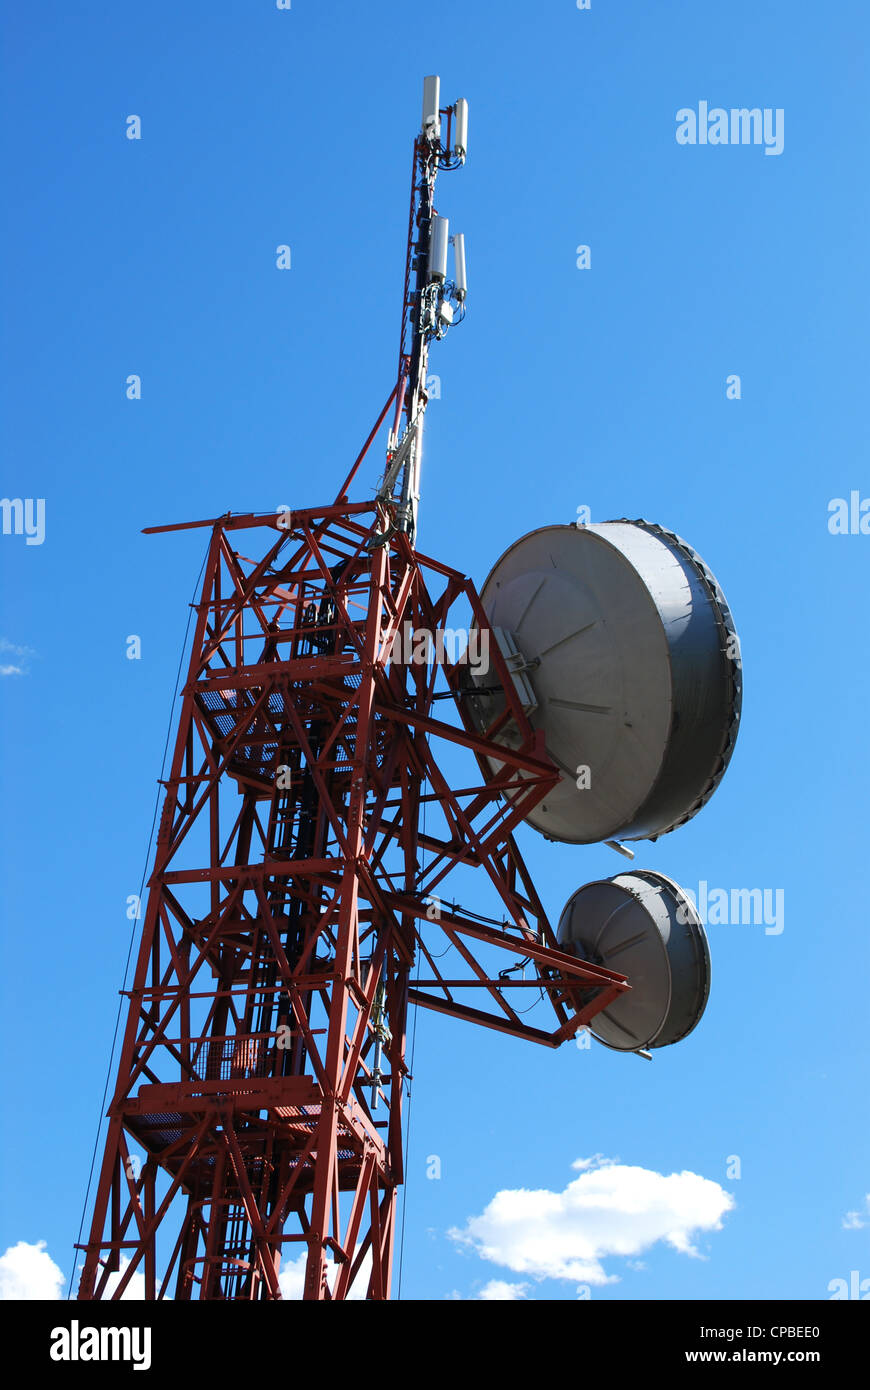 Huge communication antenna tower and satellite dishes against blue sky Stock Photo